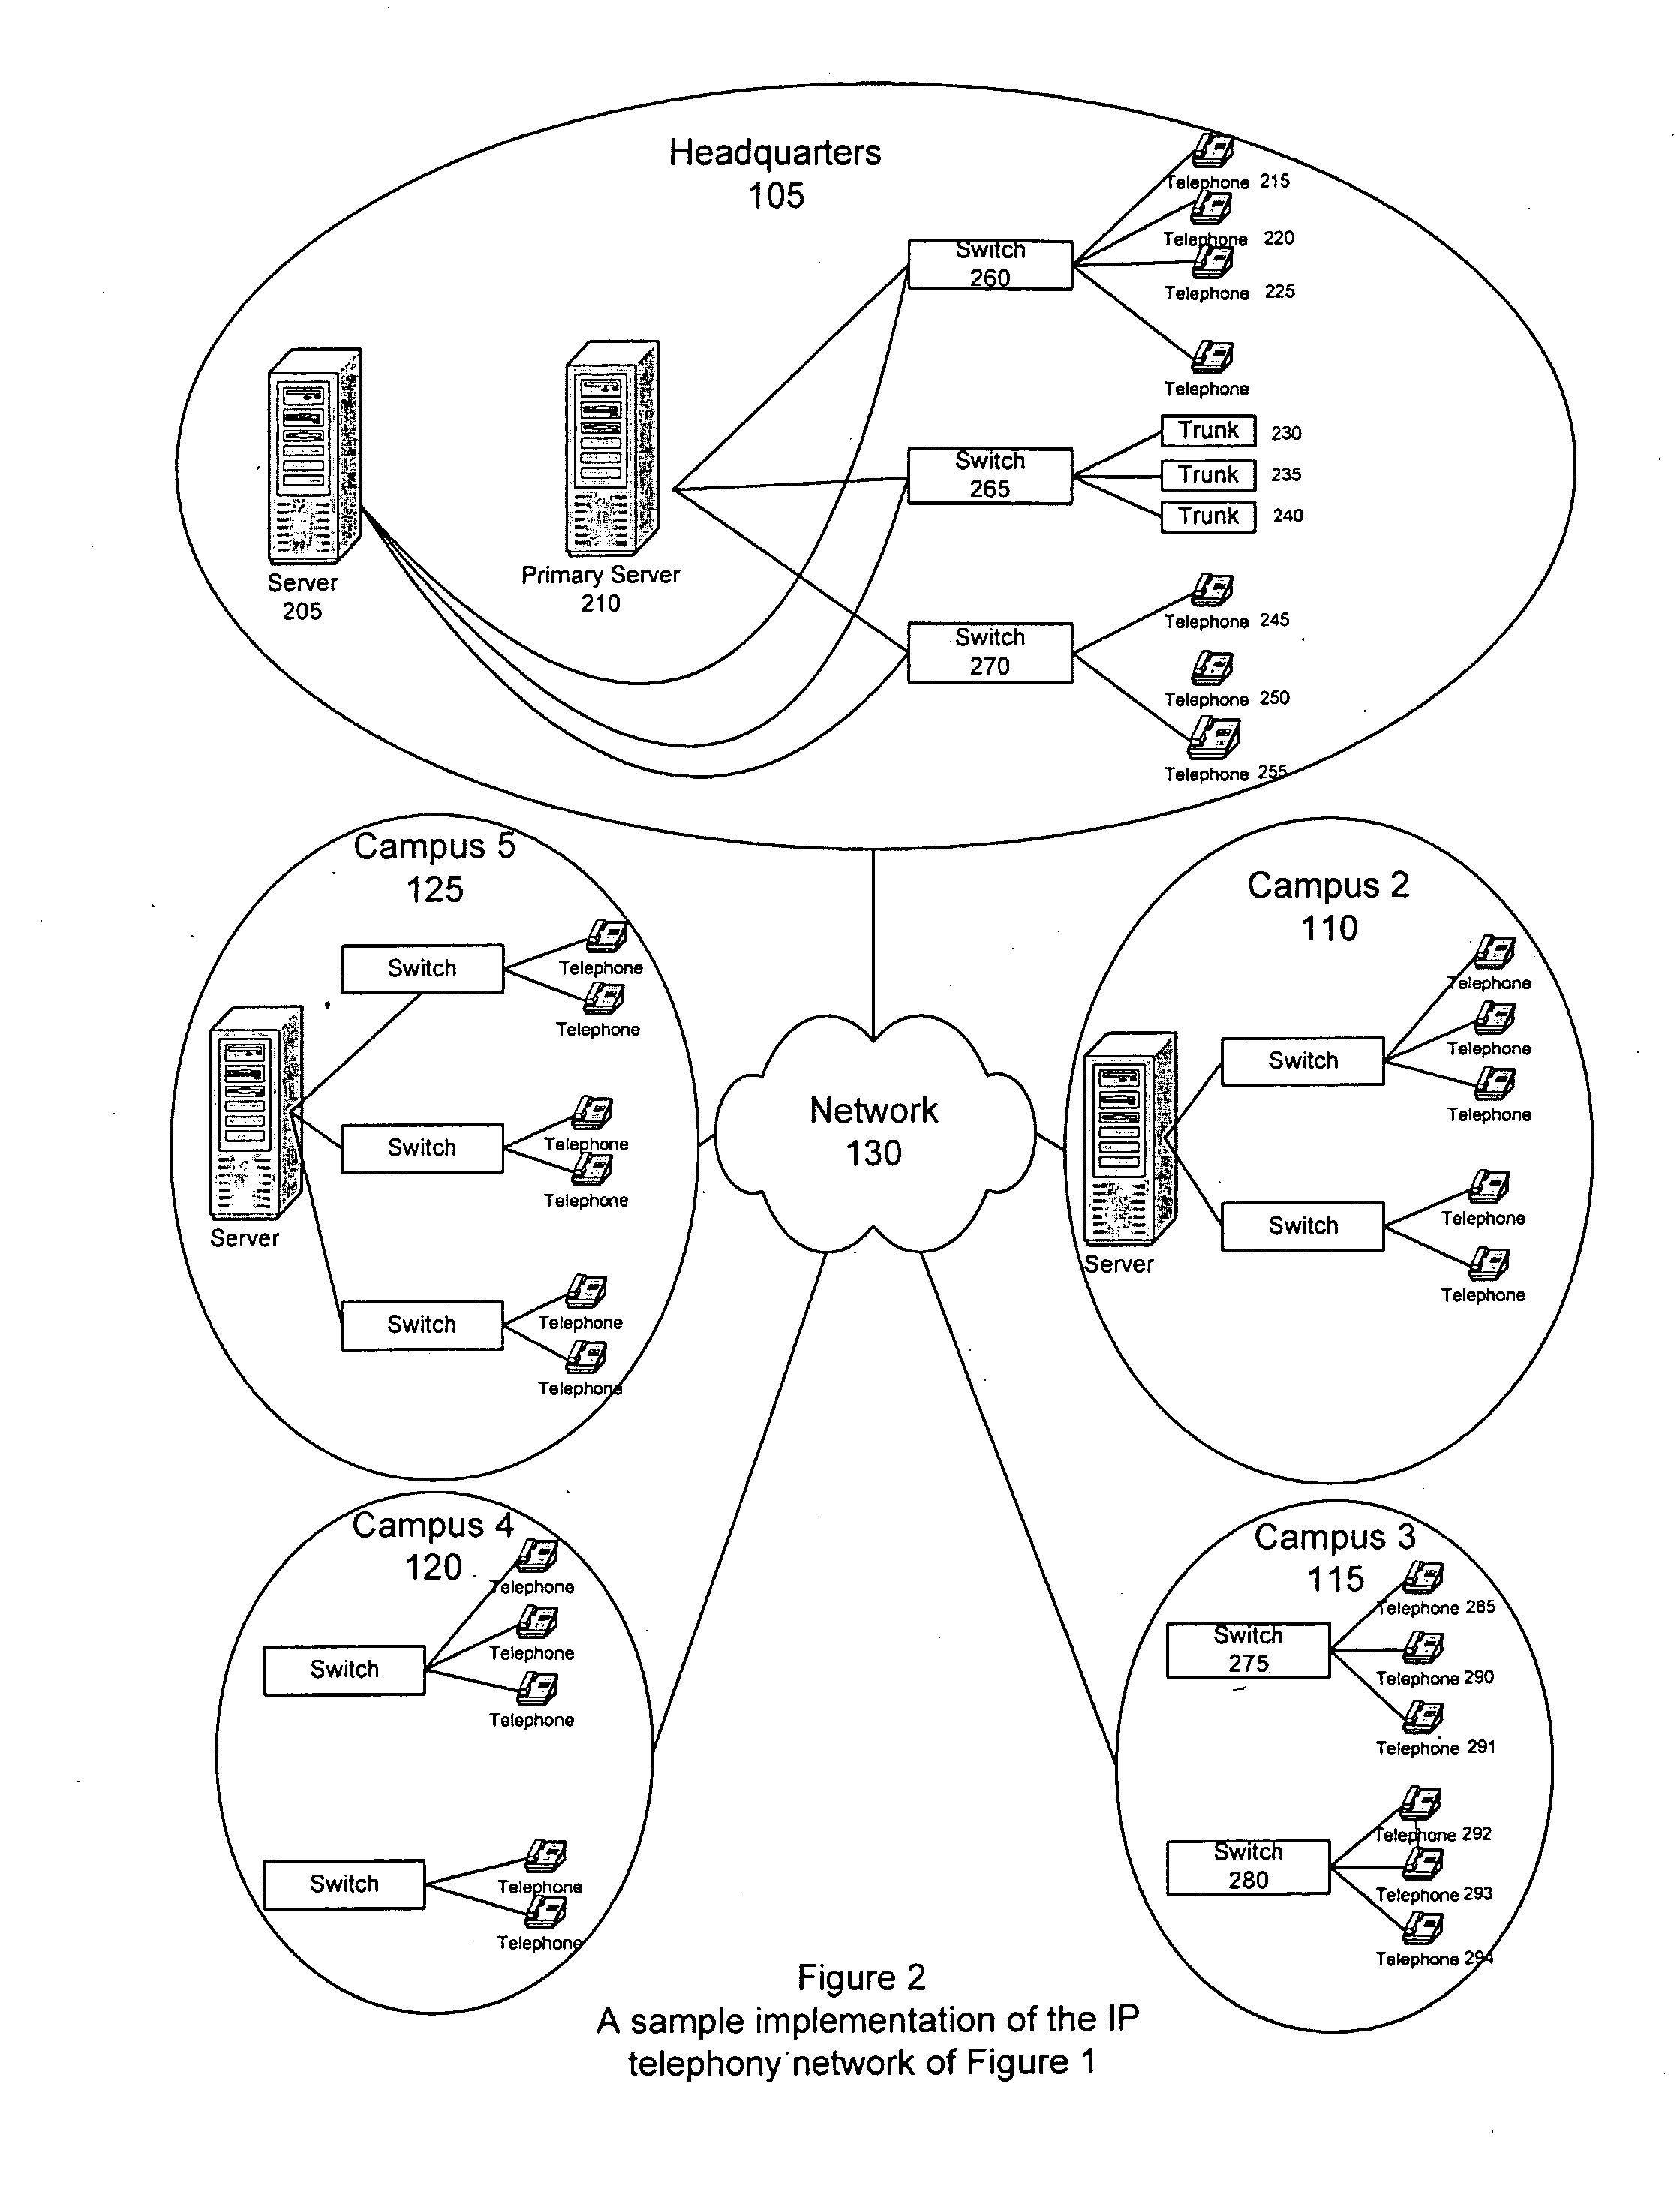 IP telephony network using a configuration map for organizing sites in a tree-like hierarchy